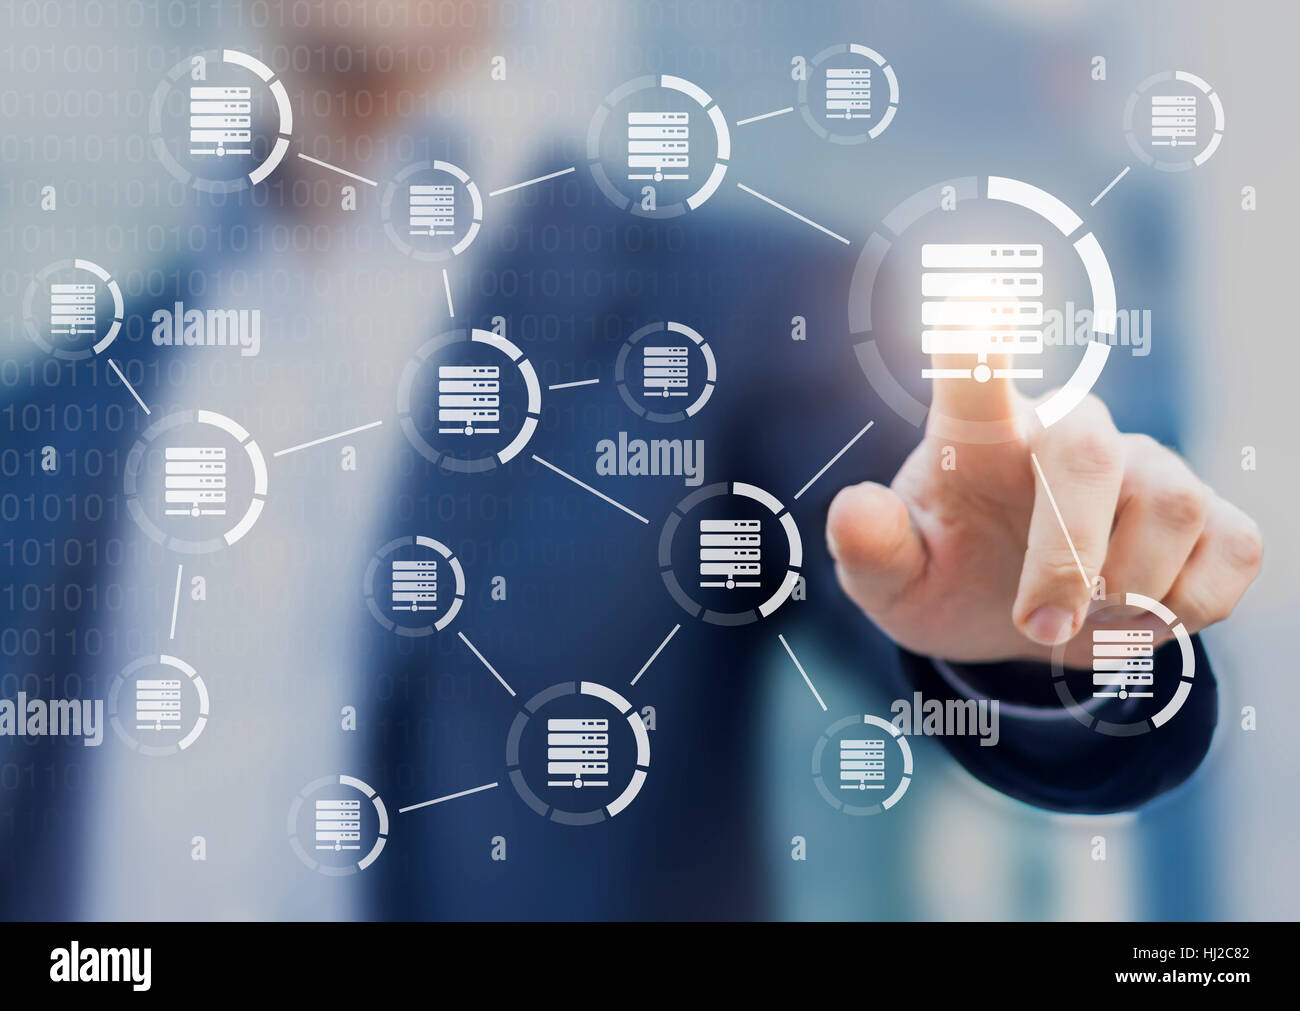 Data and server networks concept with a person touching a digital interface with icons linked together to symbolize transfer of information Stock Photo